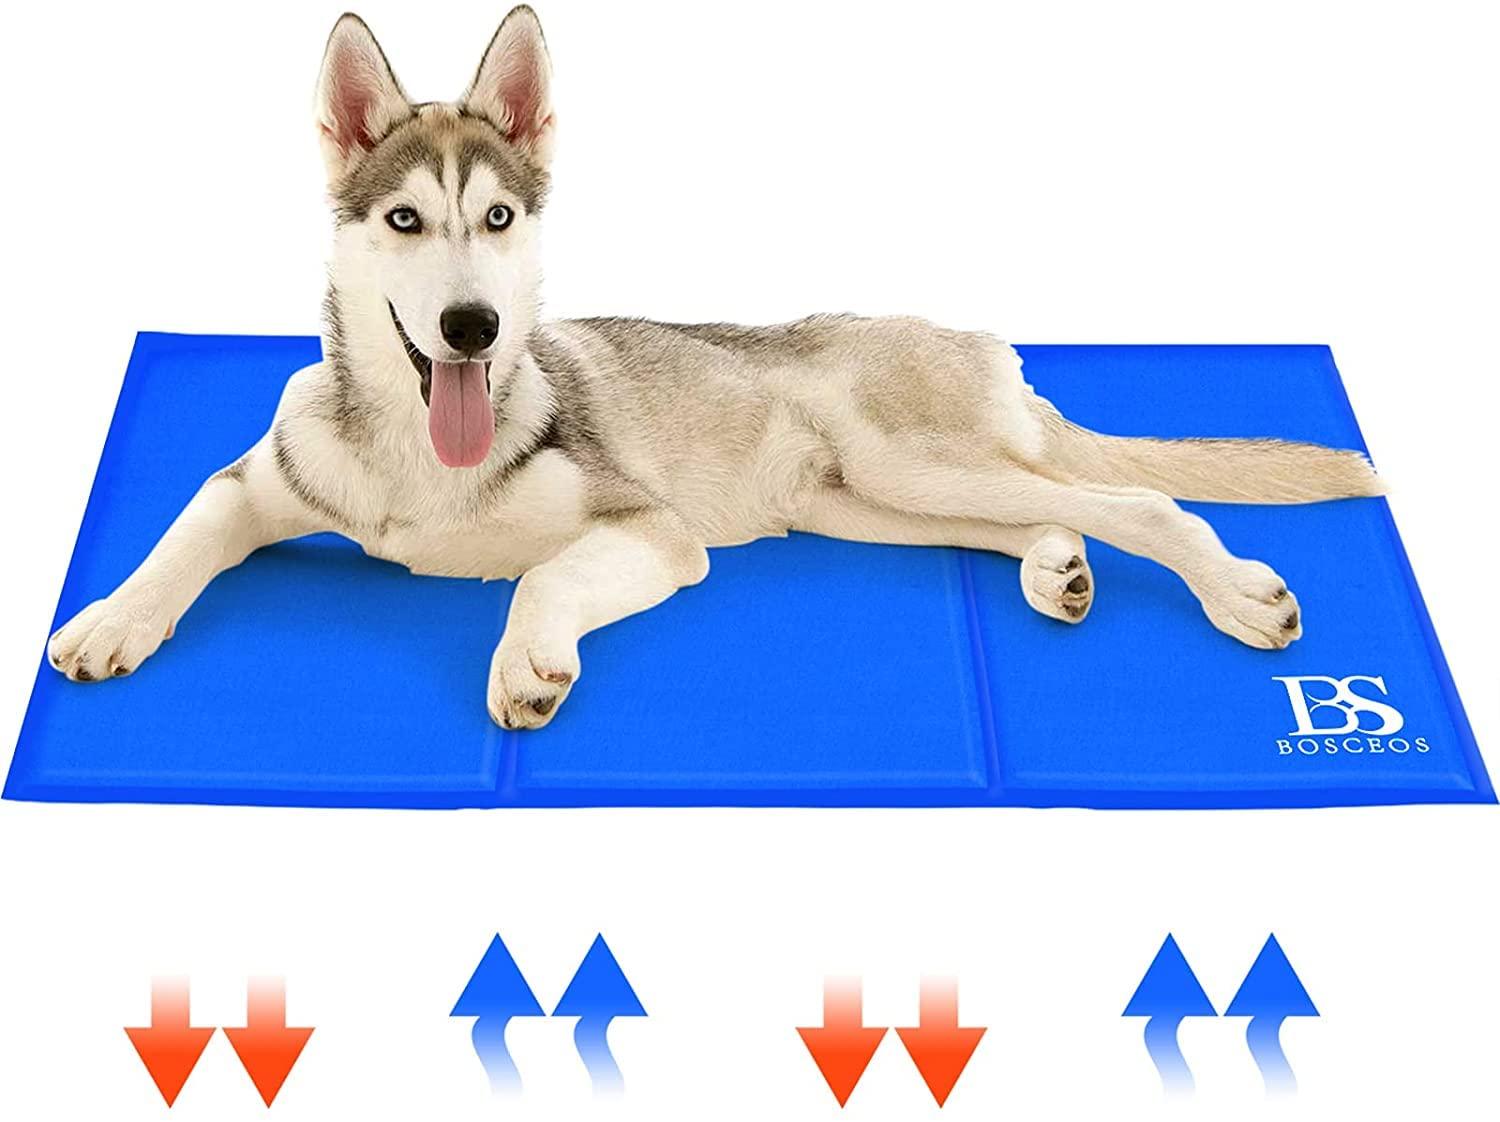 Bosceos Large Dog Cooling Mat, Waterproof Scratch-proof Activated Gel Cooling Pad for Dogs, Non-Toxic, Great Dog Accessories to Help Your Pet Stay Cool This Summer, Ideal for Home & Travel, 90x50cm